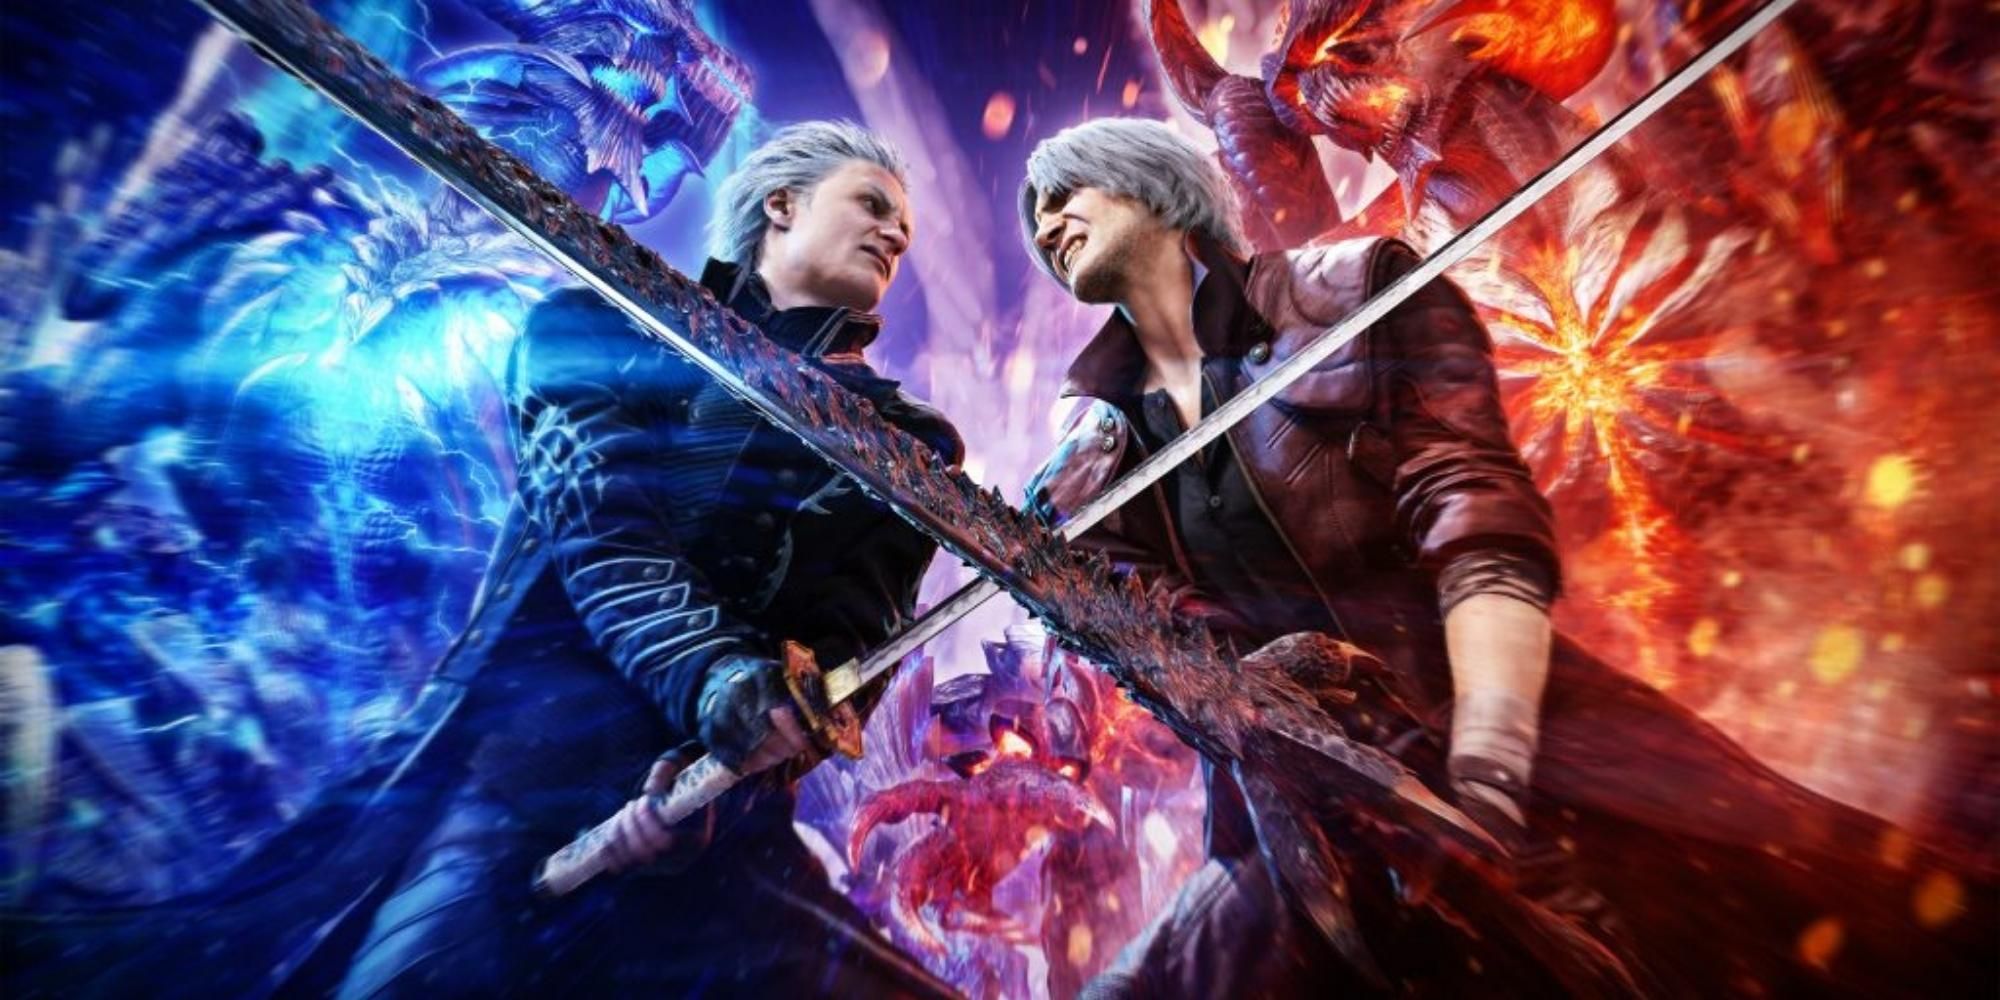 Vergil and Dante fight in Devil May Cry 5